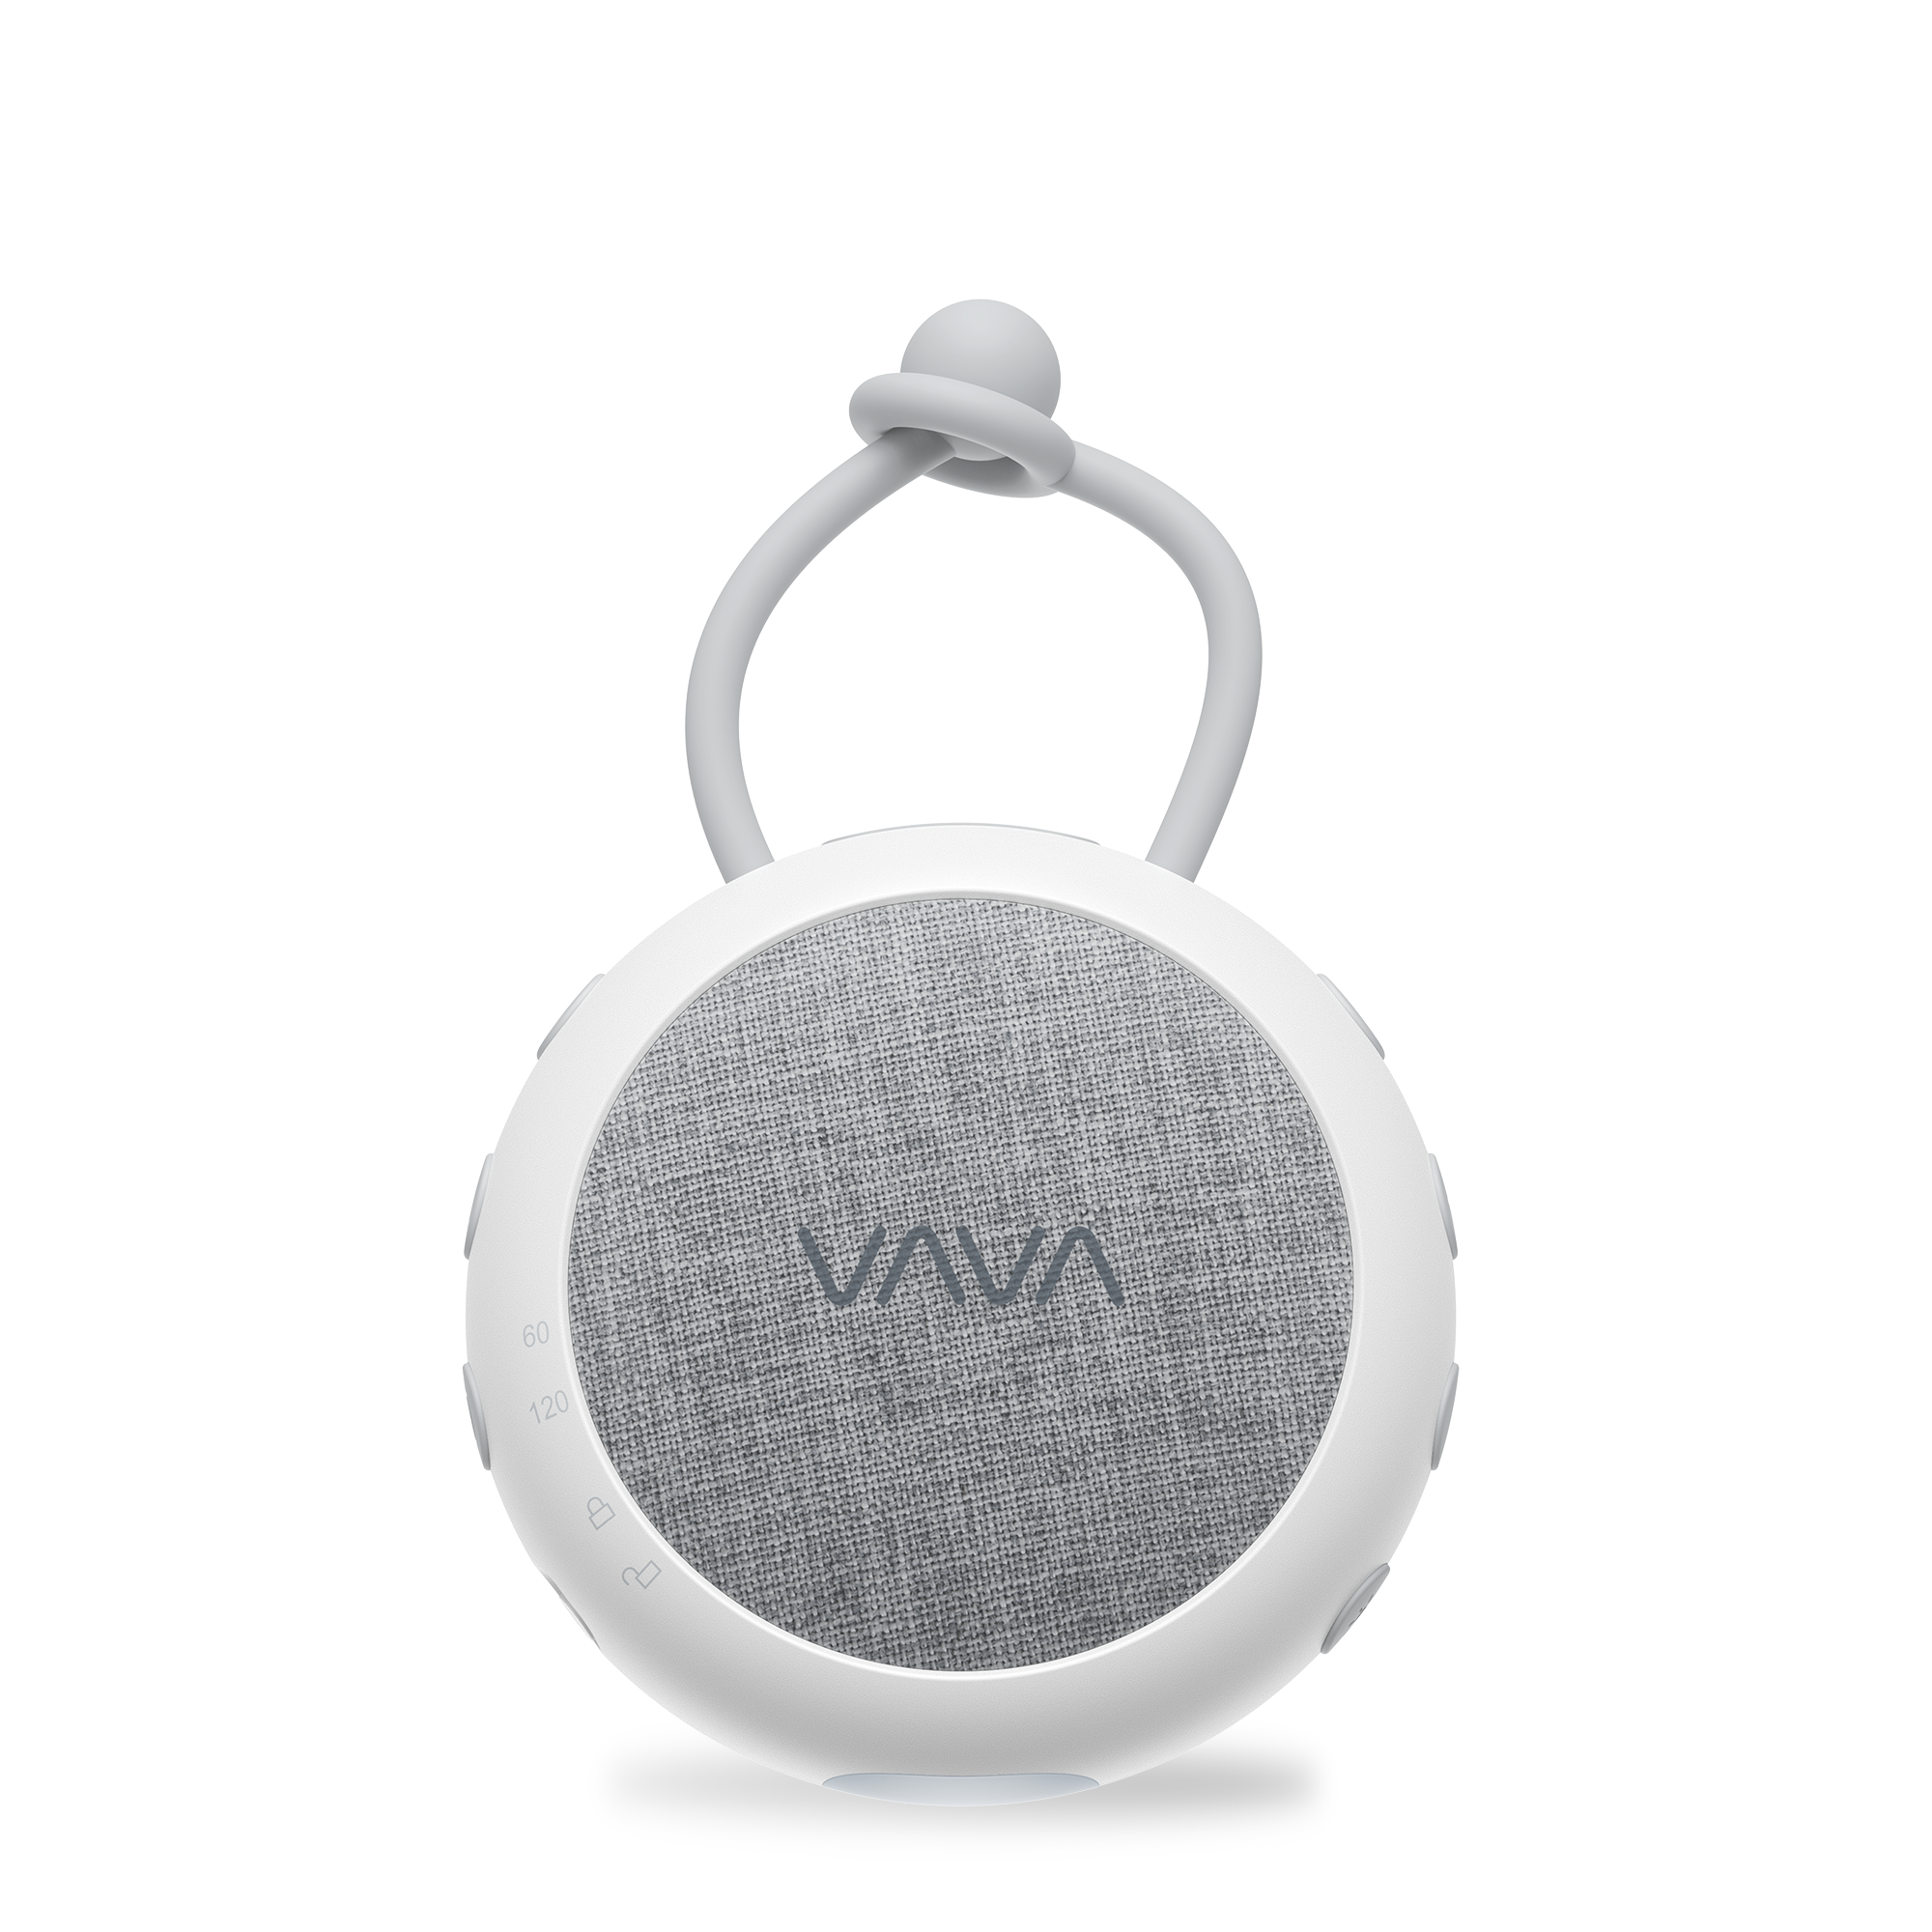 VAVA Twinkle Soother portable baby sound machine and nightlight with antenna looped.